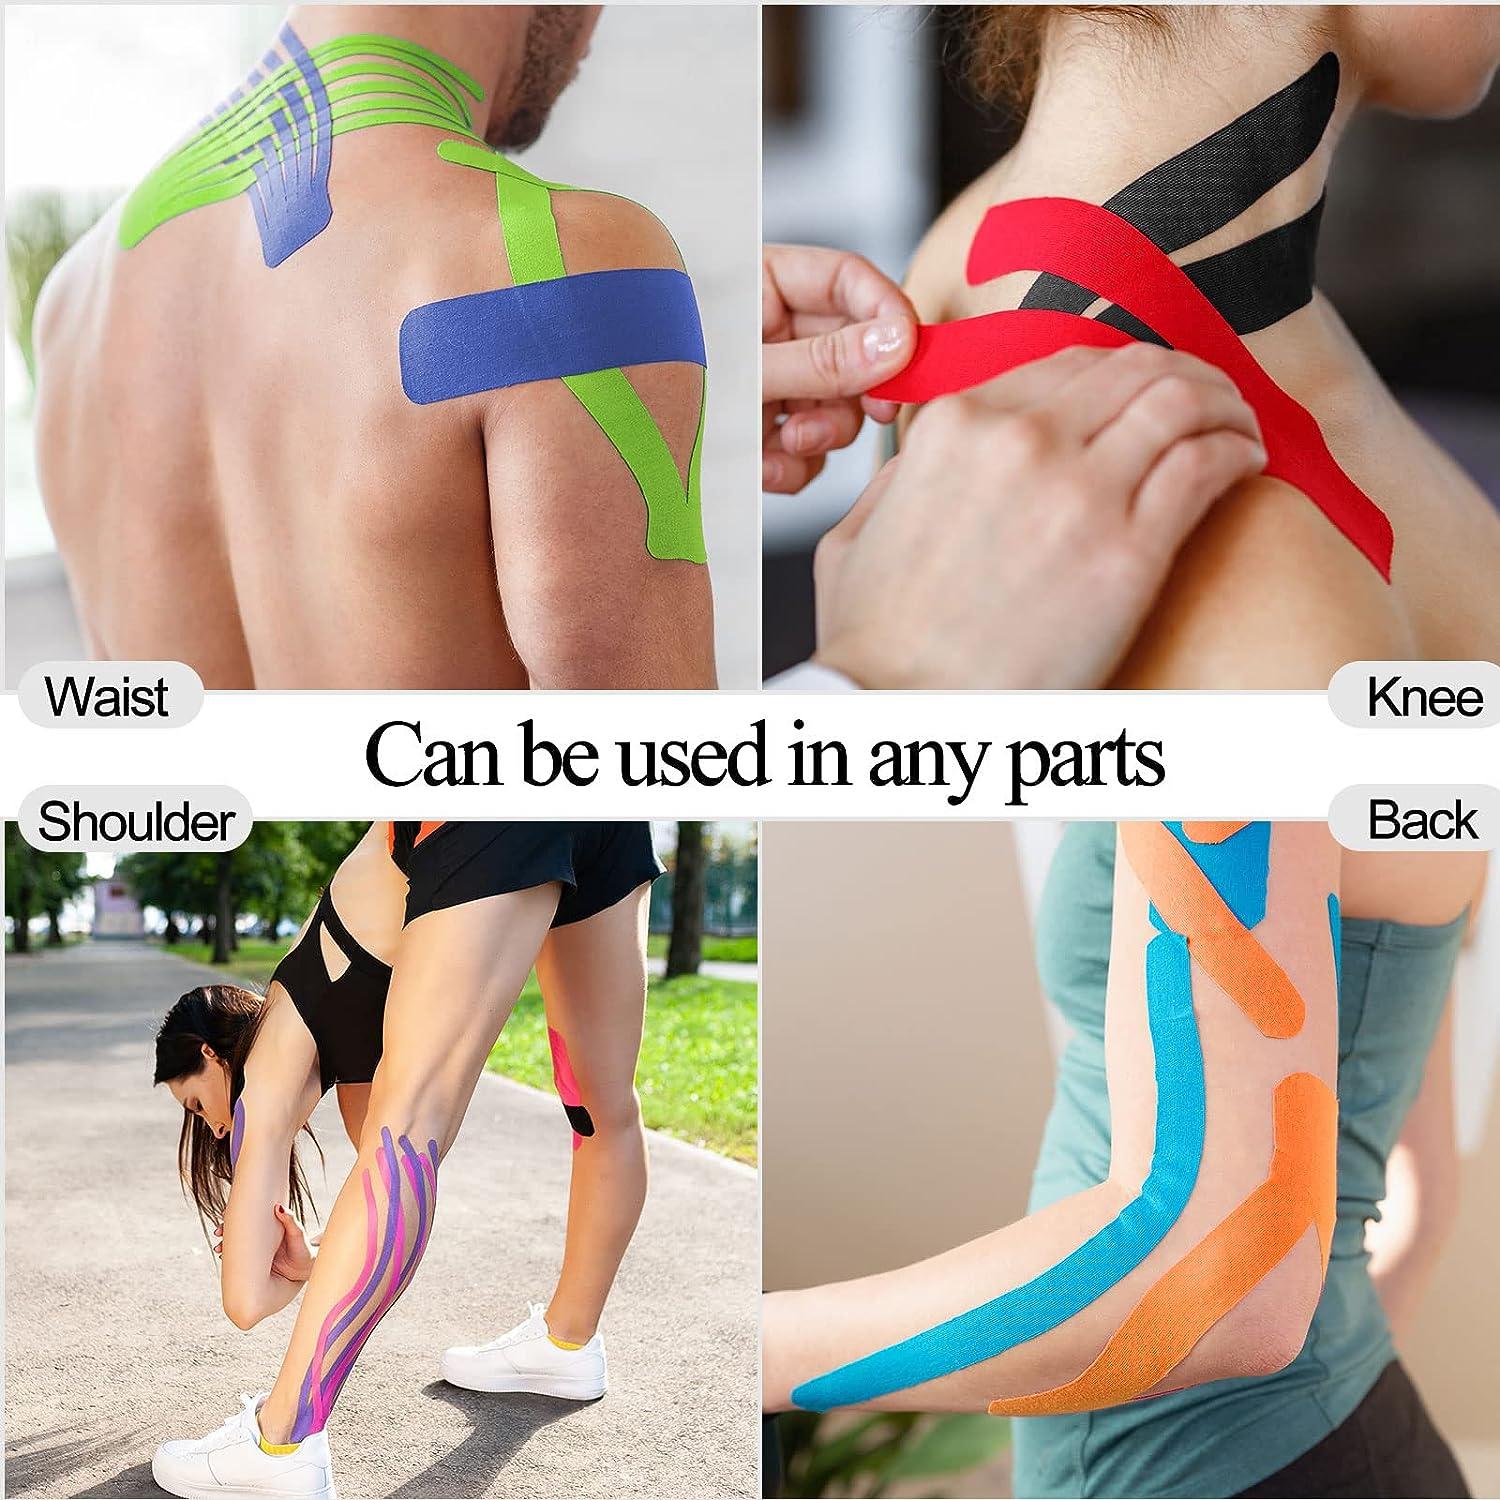 2Roll Kinesiology Tape Medical Gym Knee Shoulder Body Muscle Pain